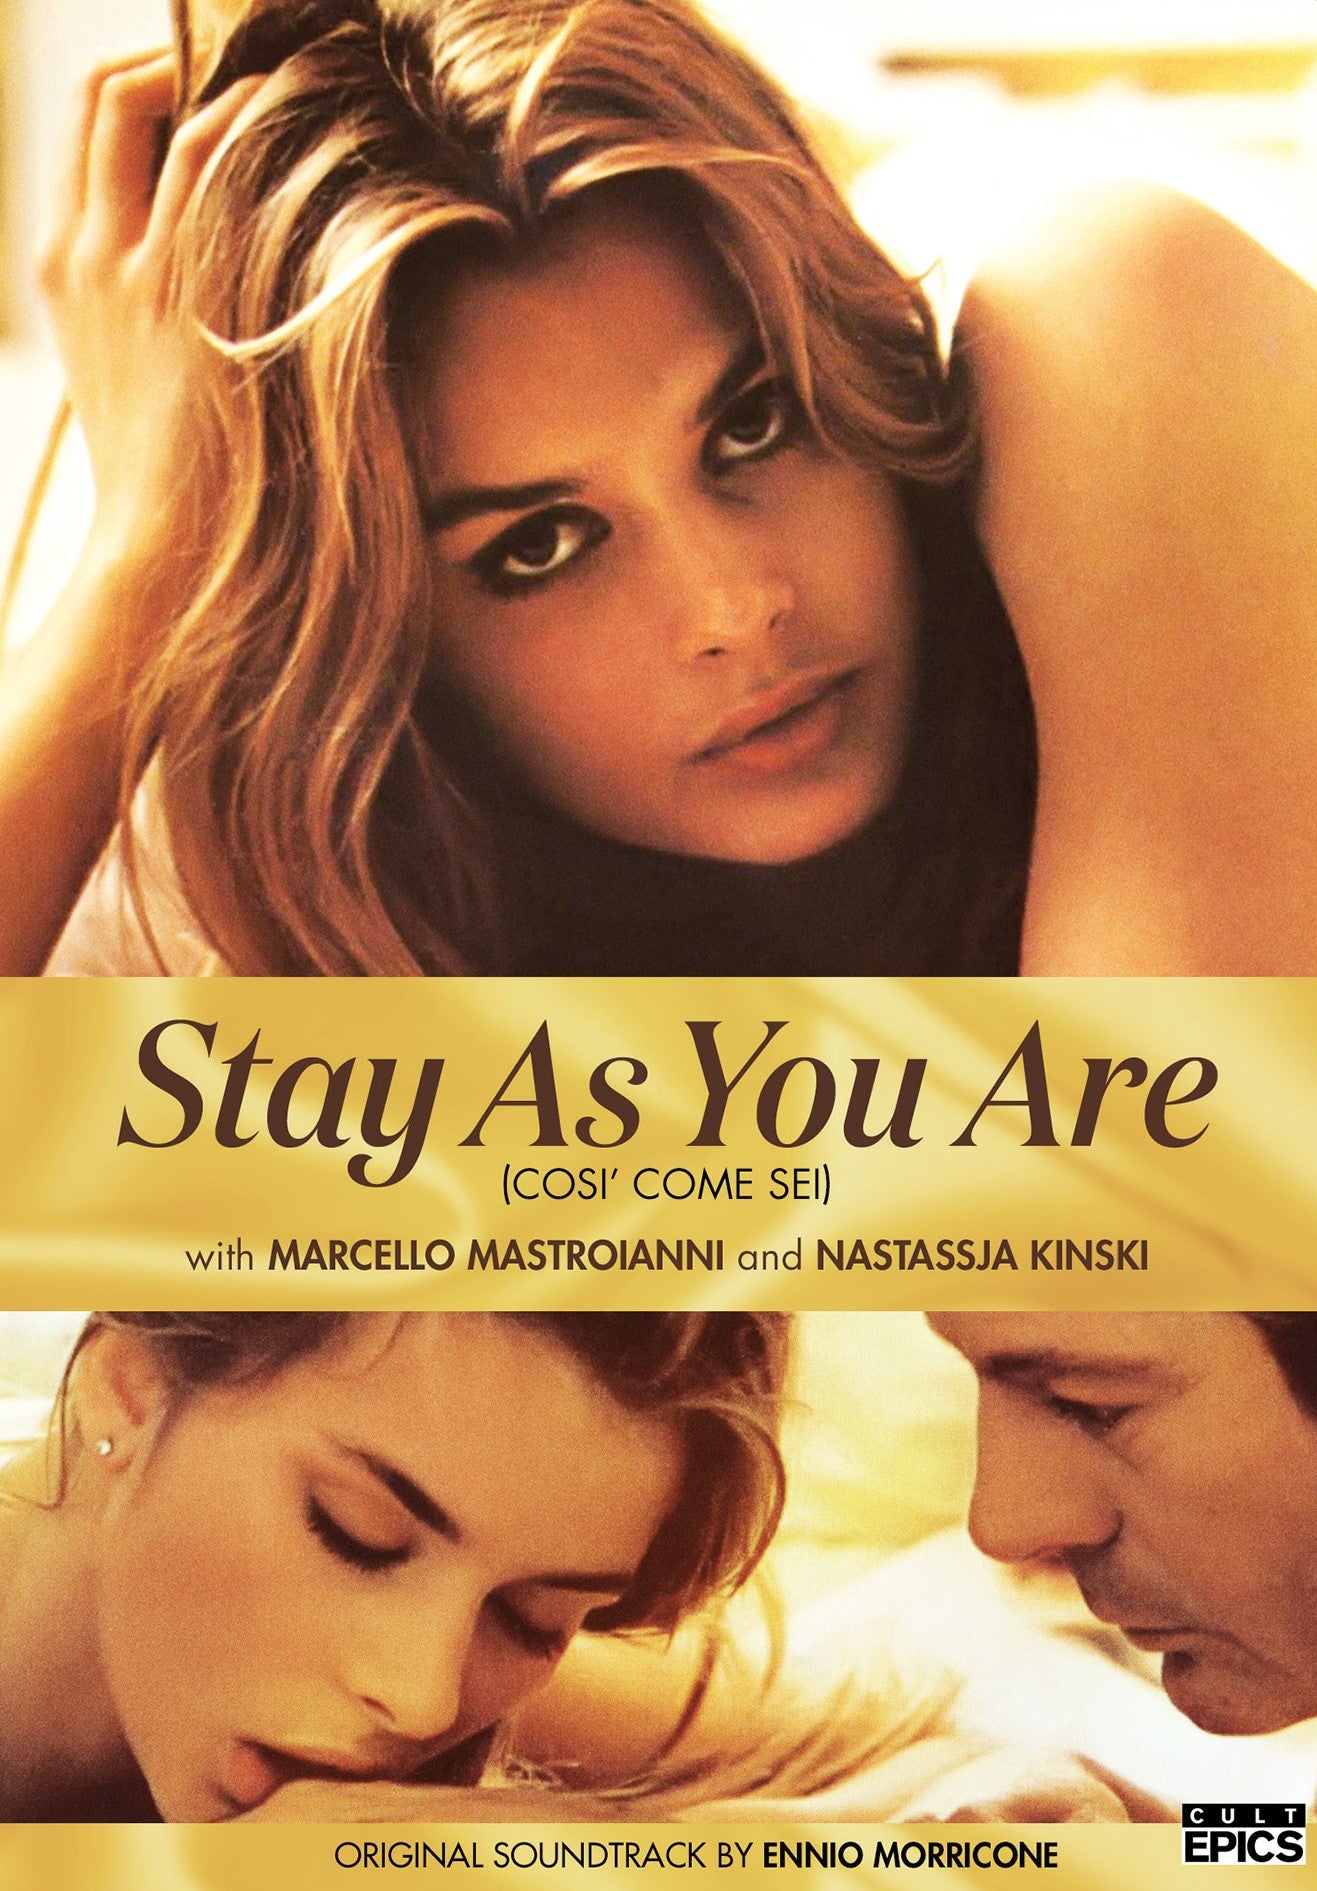 STAY AS YOU ARE DVD